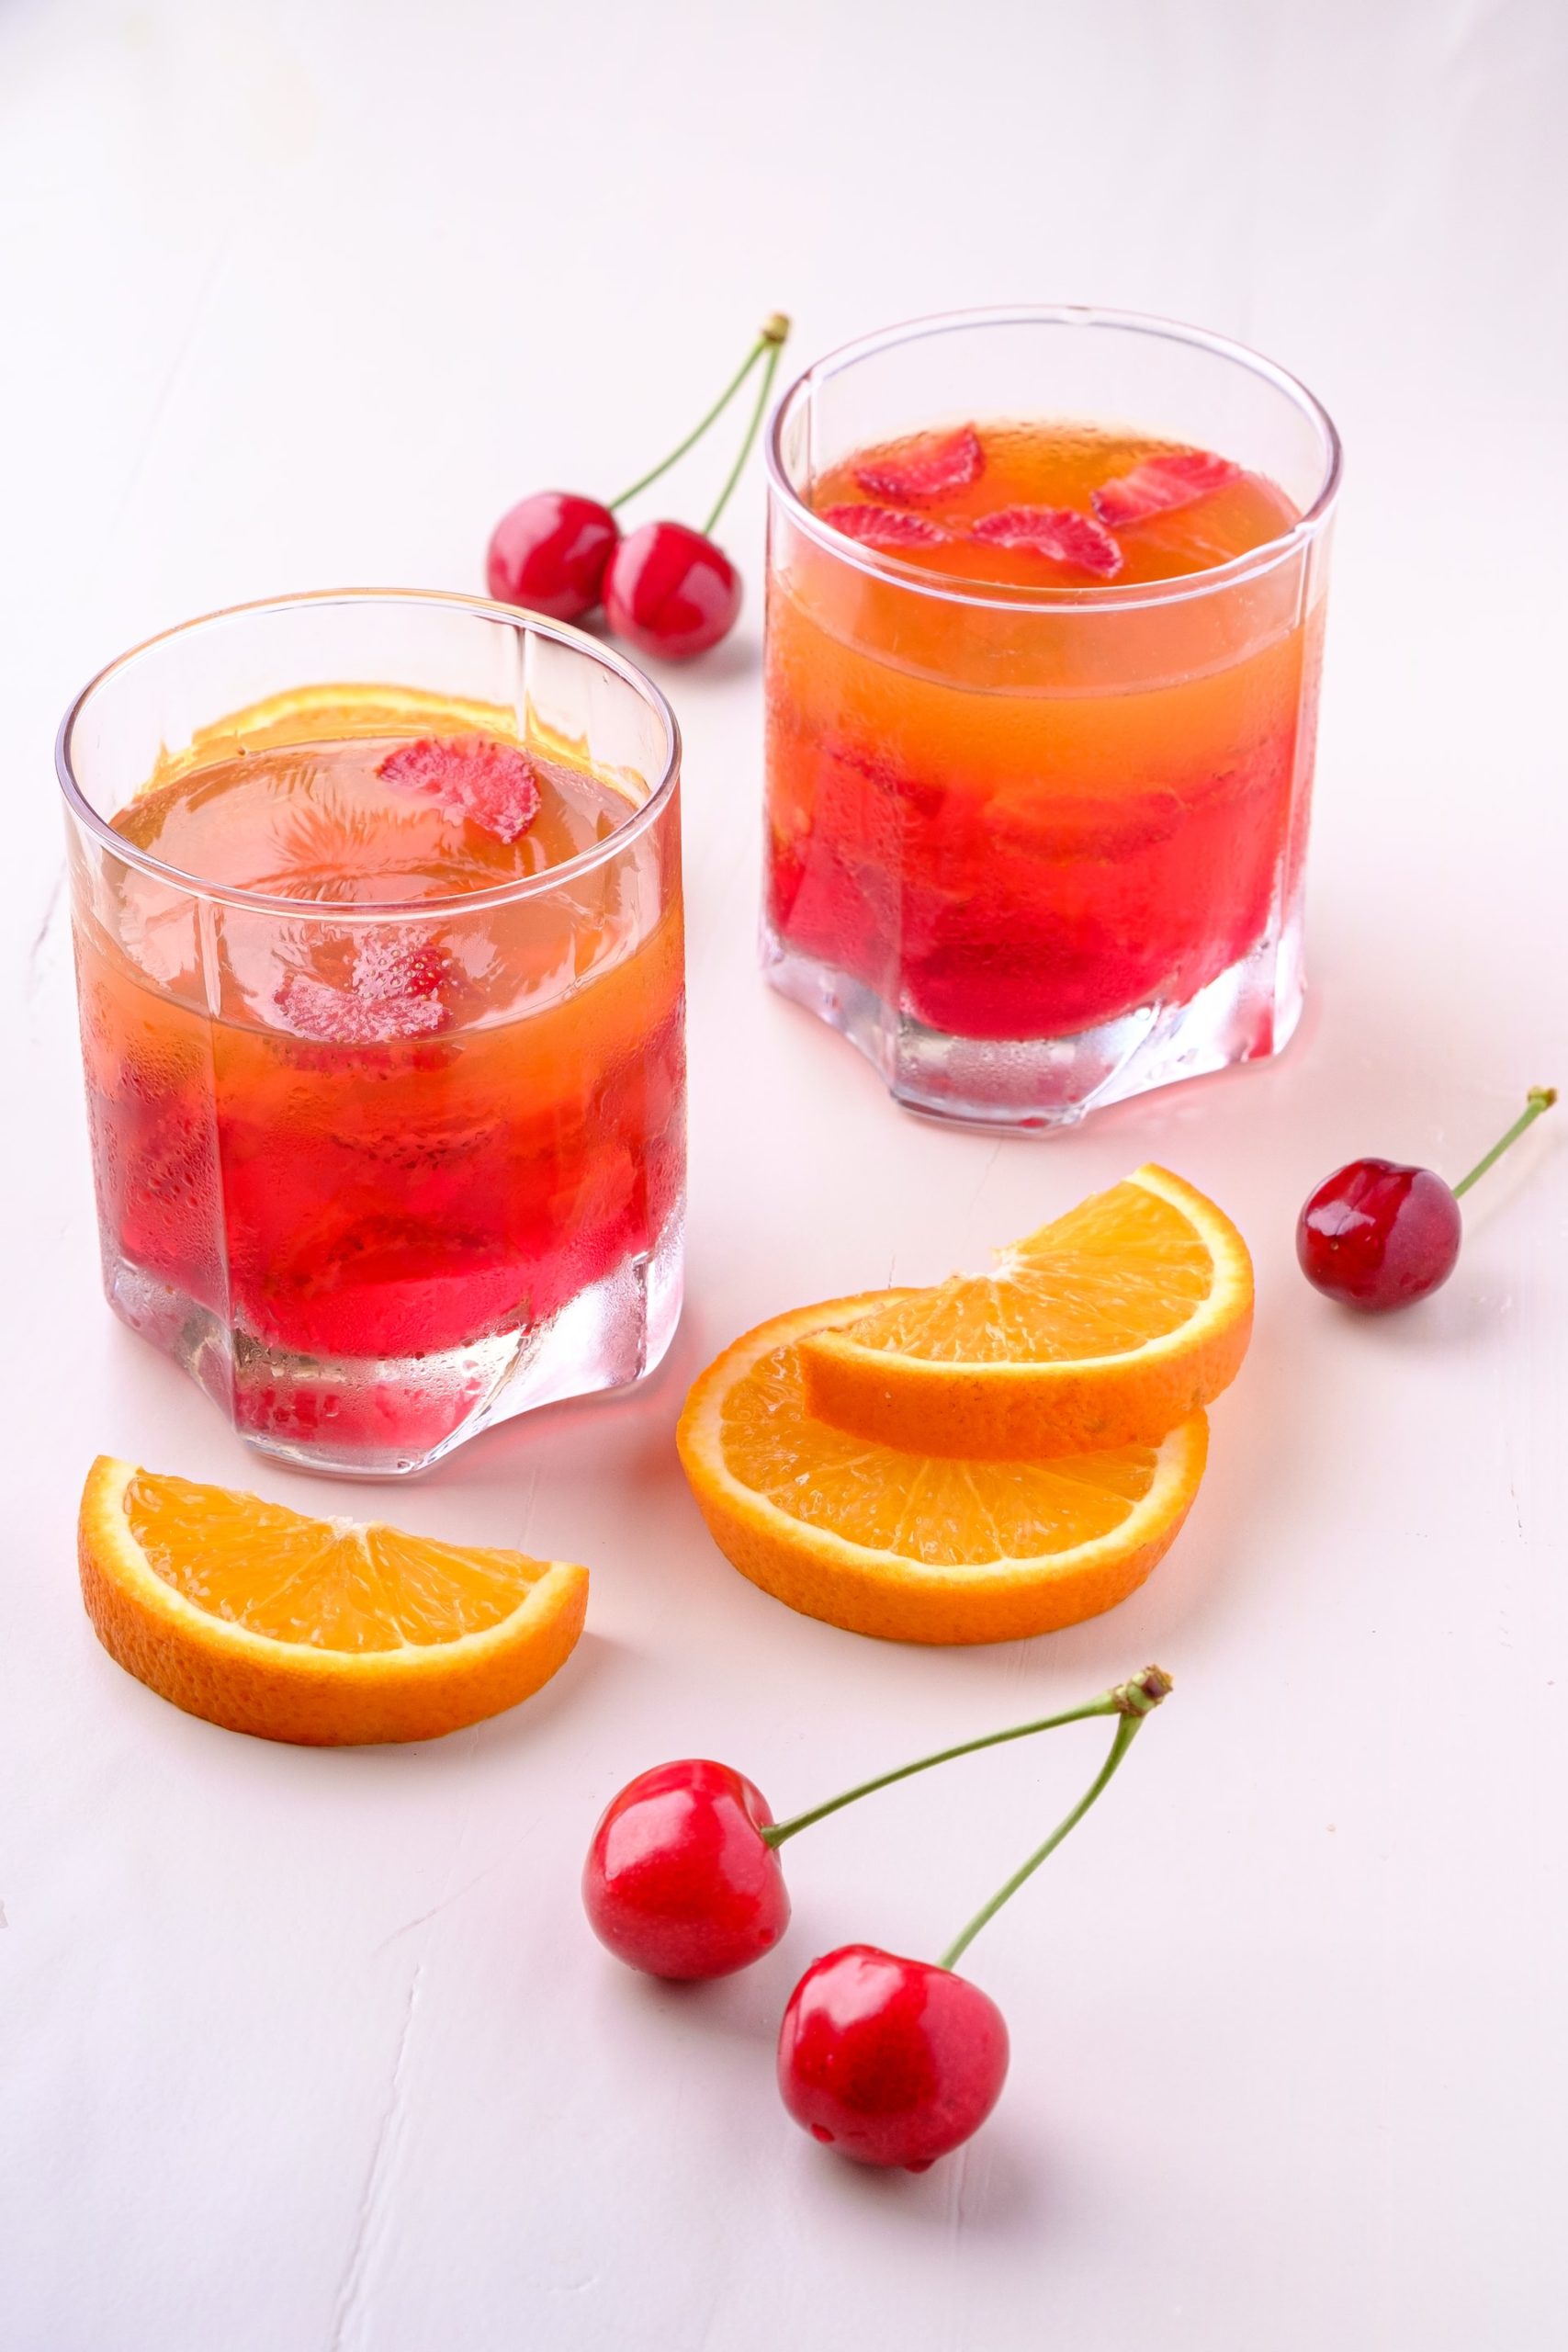 Two red and orange layered Campfire Fireball cocktails against a white background surrounded by orange slices and cherries.